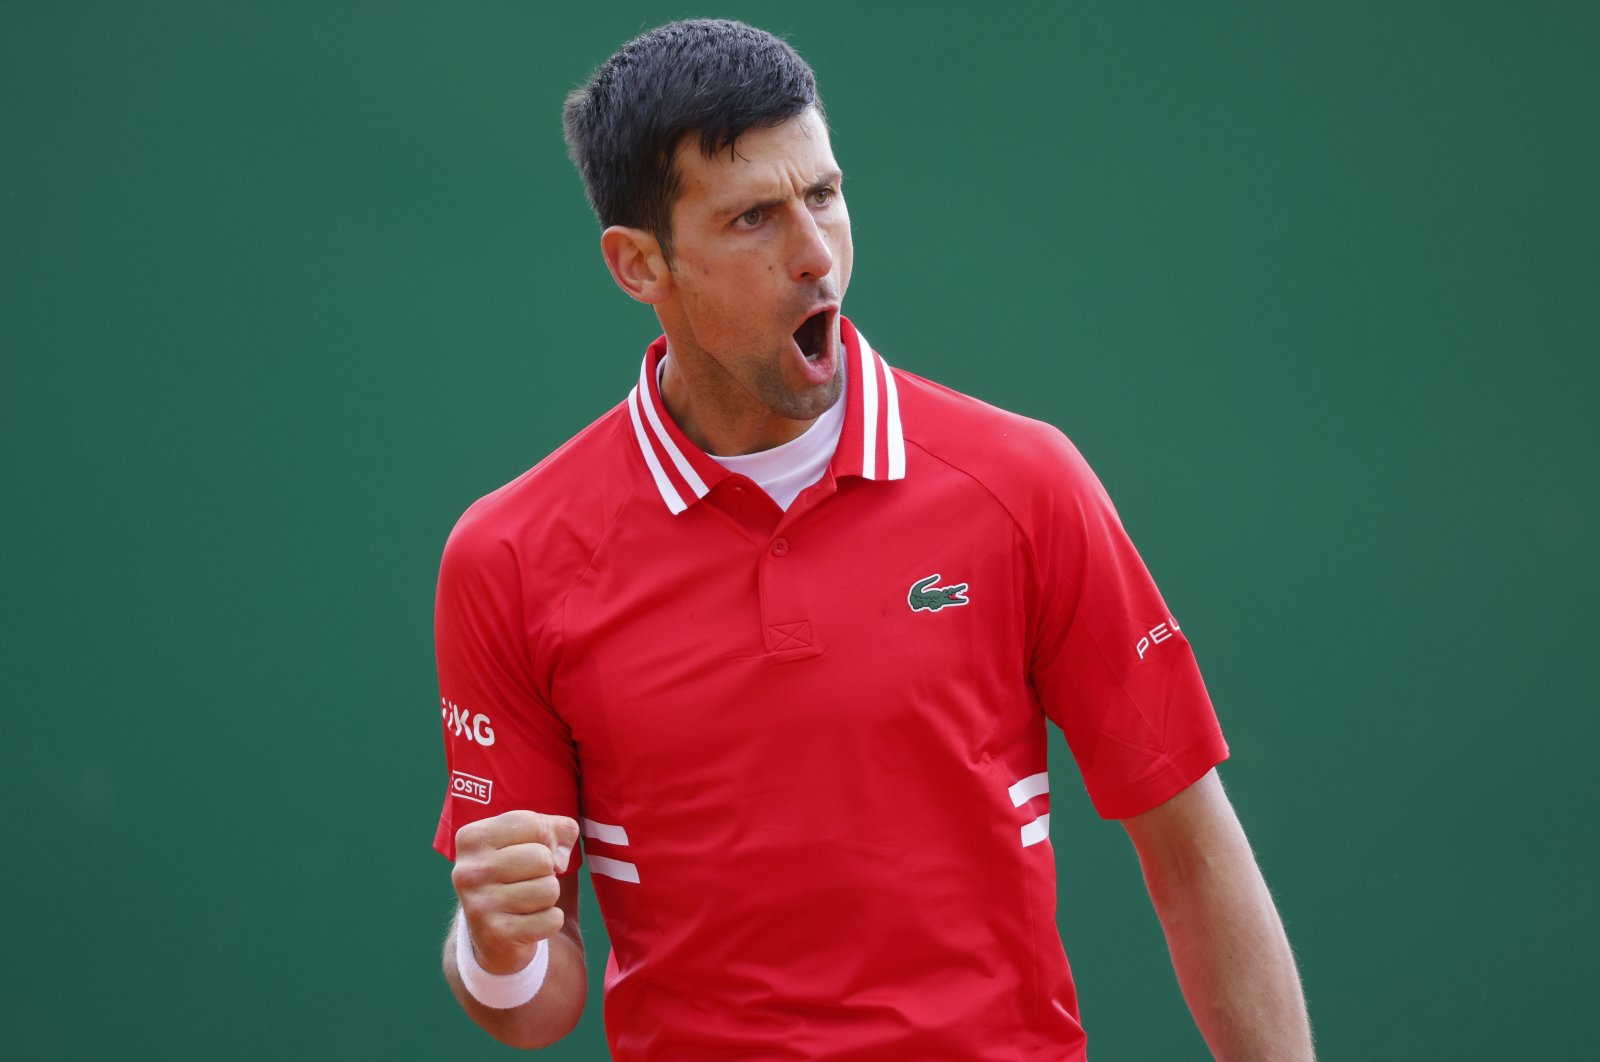 Serbia's Novak Djokovic reacts during his second-round match against Italy's Jannik Sinner at the Monte Carlo Masters, Roquebrune Cap Martin, France, April 14, 2021. (Reuters Photo)